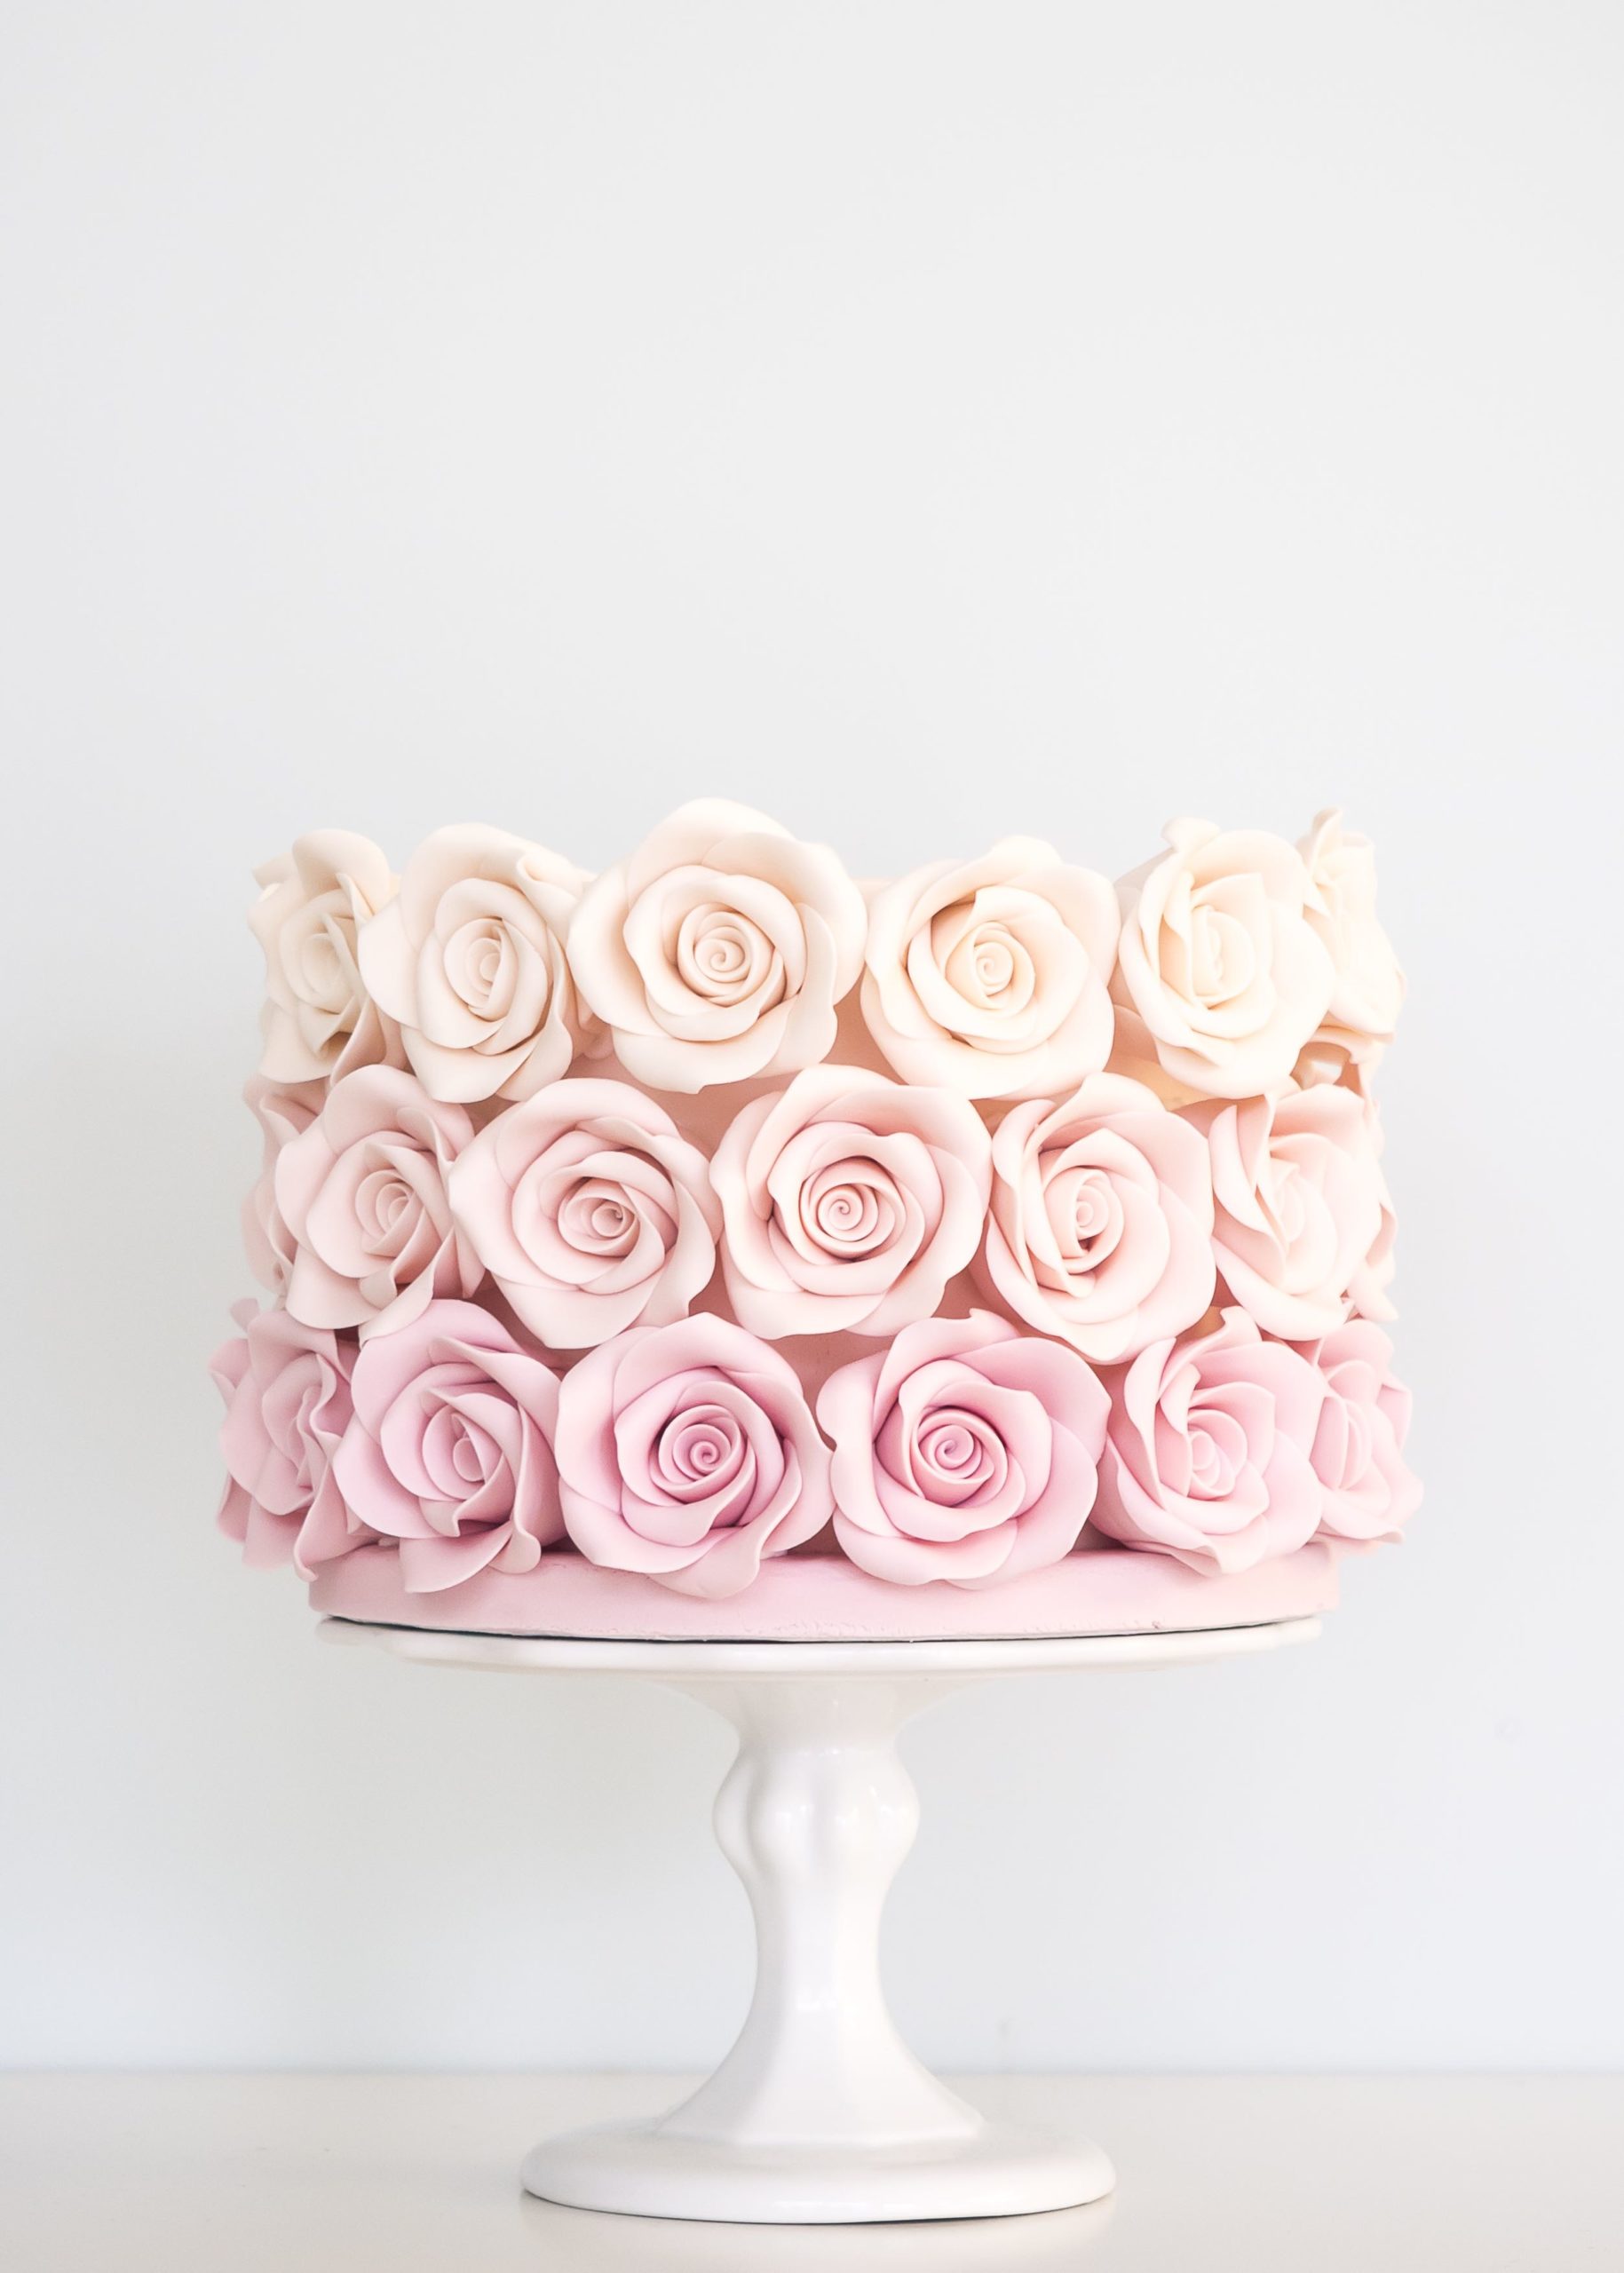 Sweet dreams: 8 of our favourite wedding cakes